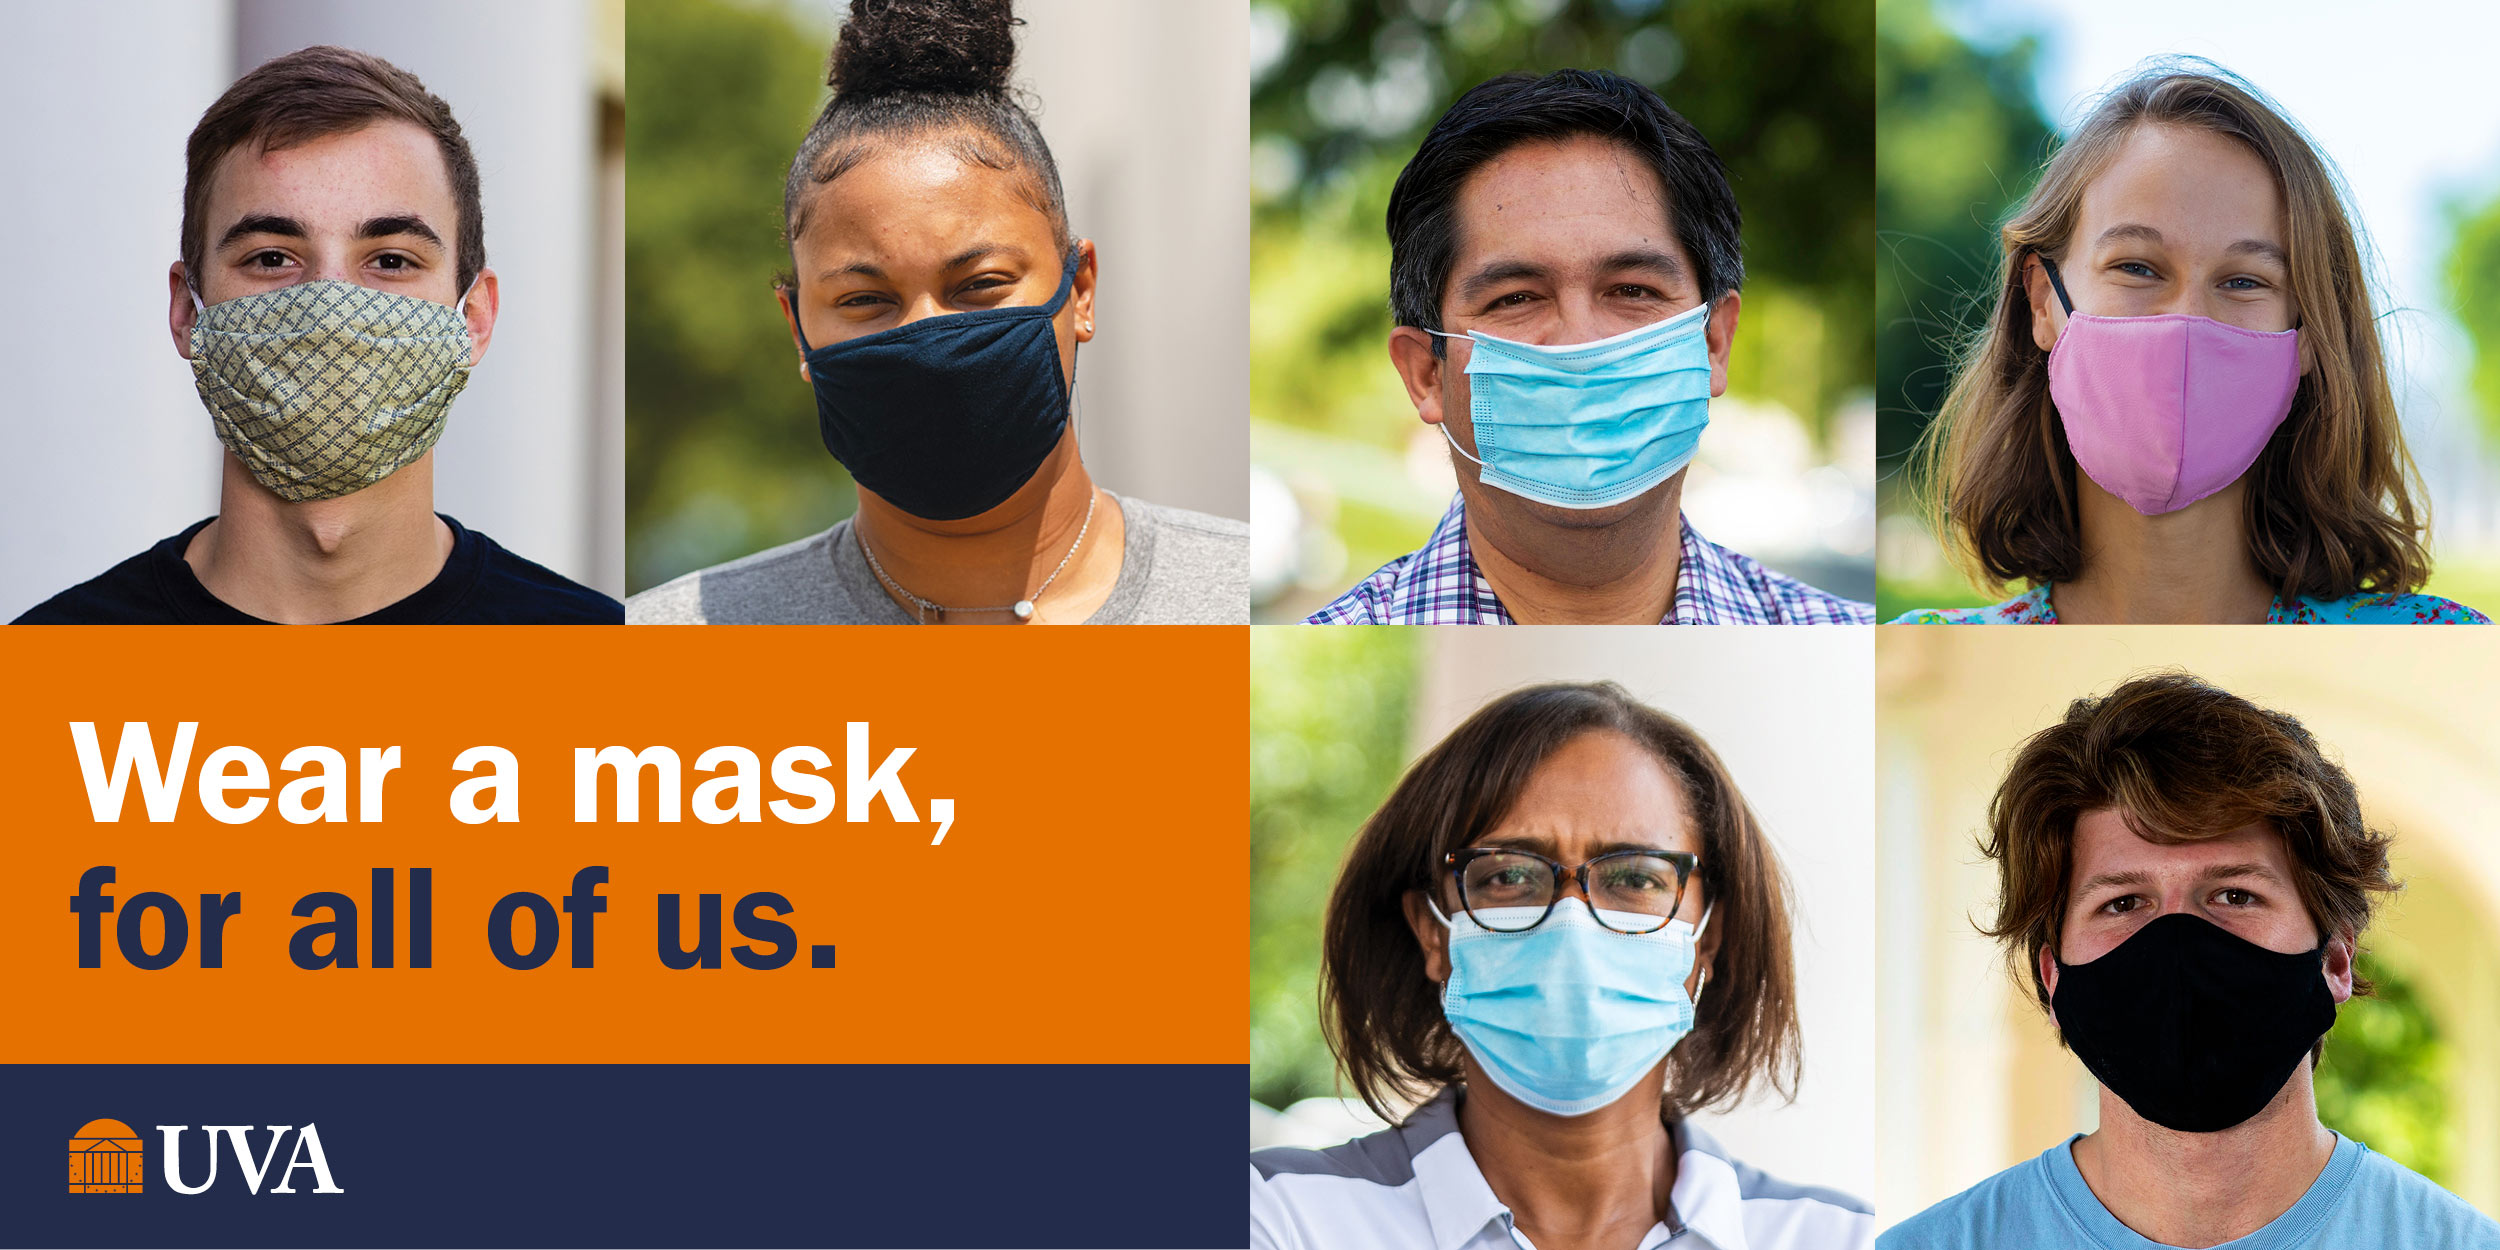 Various team member headshots with the text: Wear a mask, for all of us. UVA.